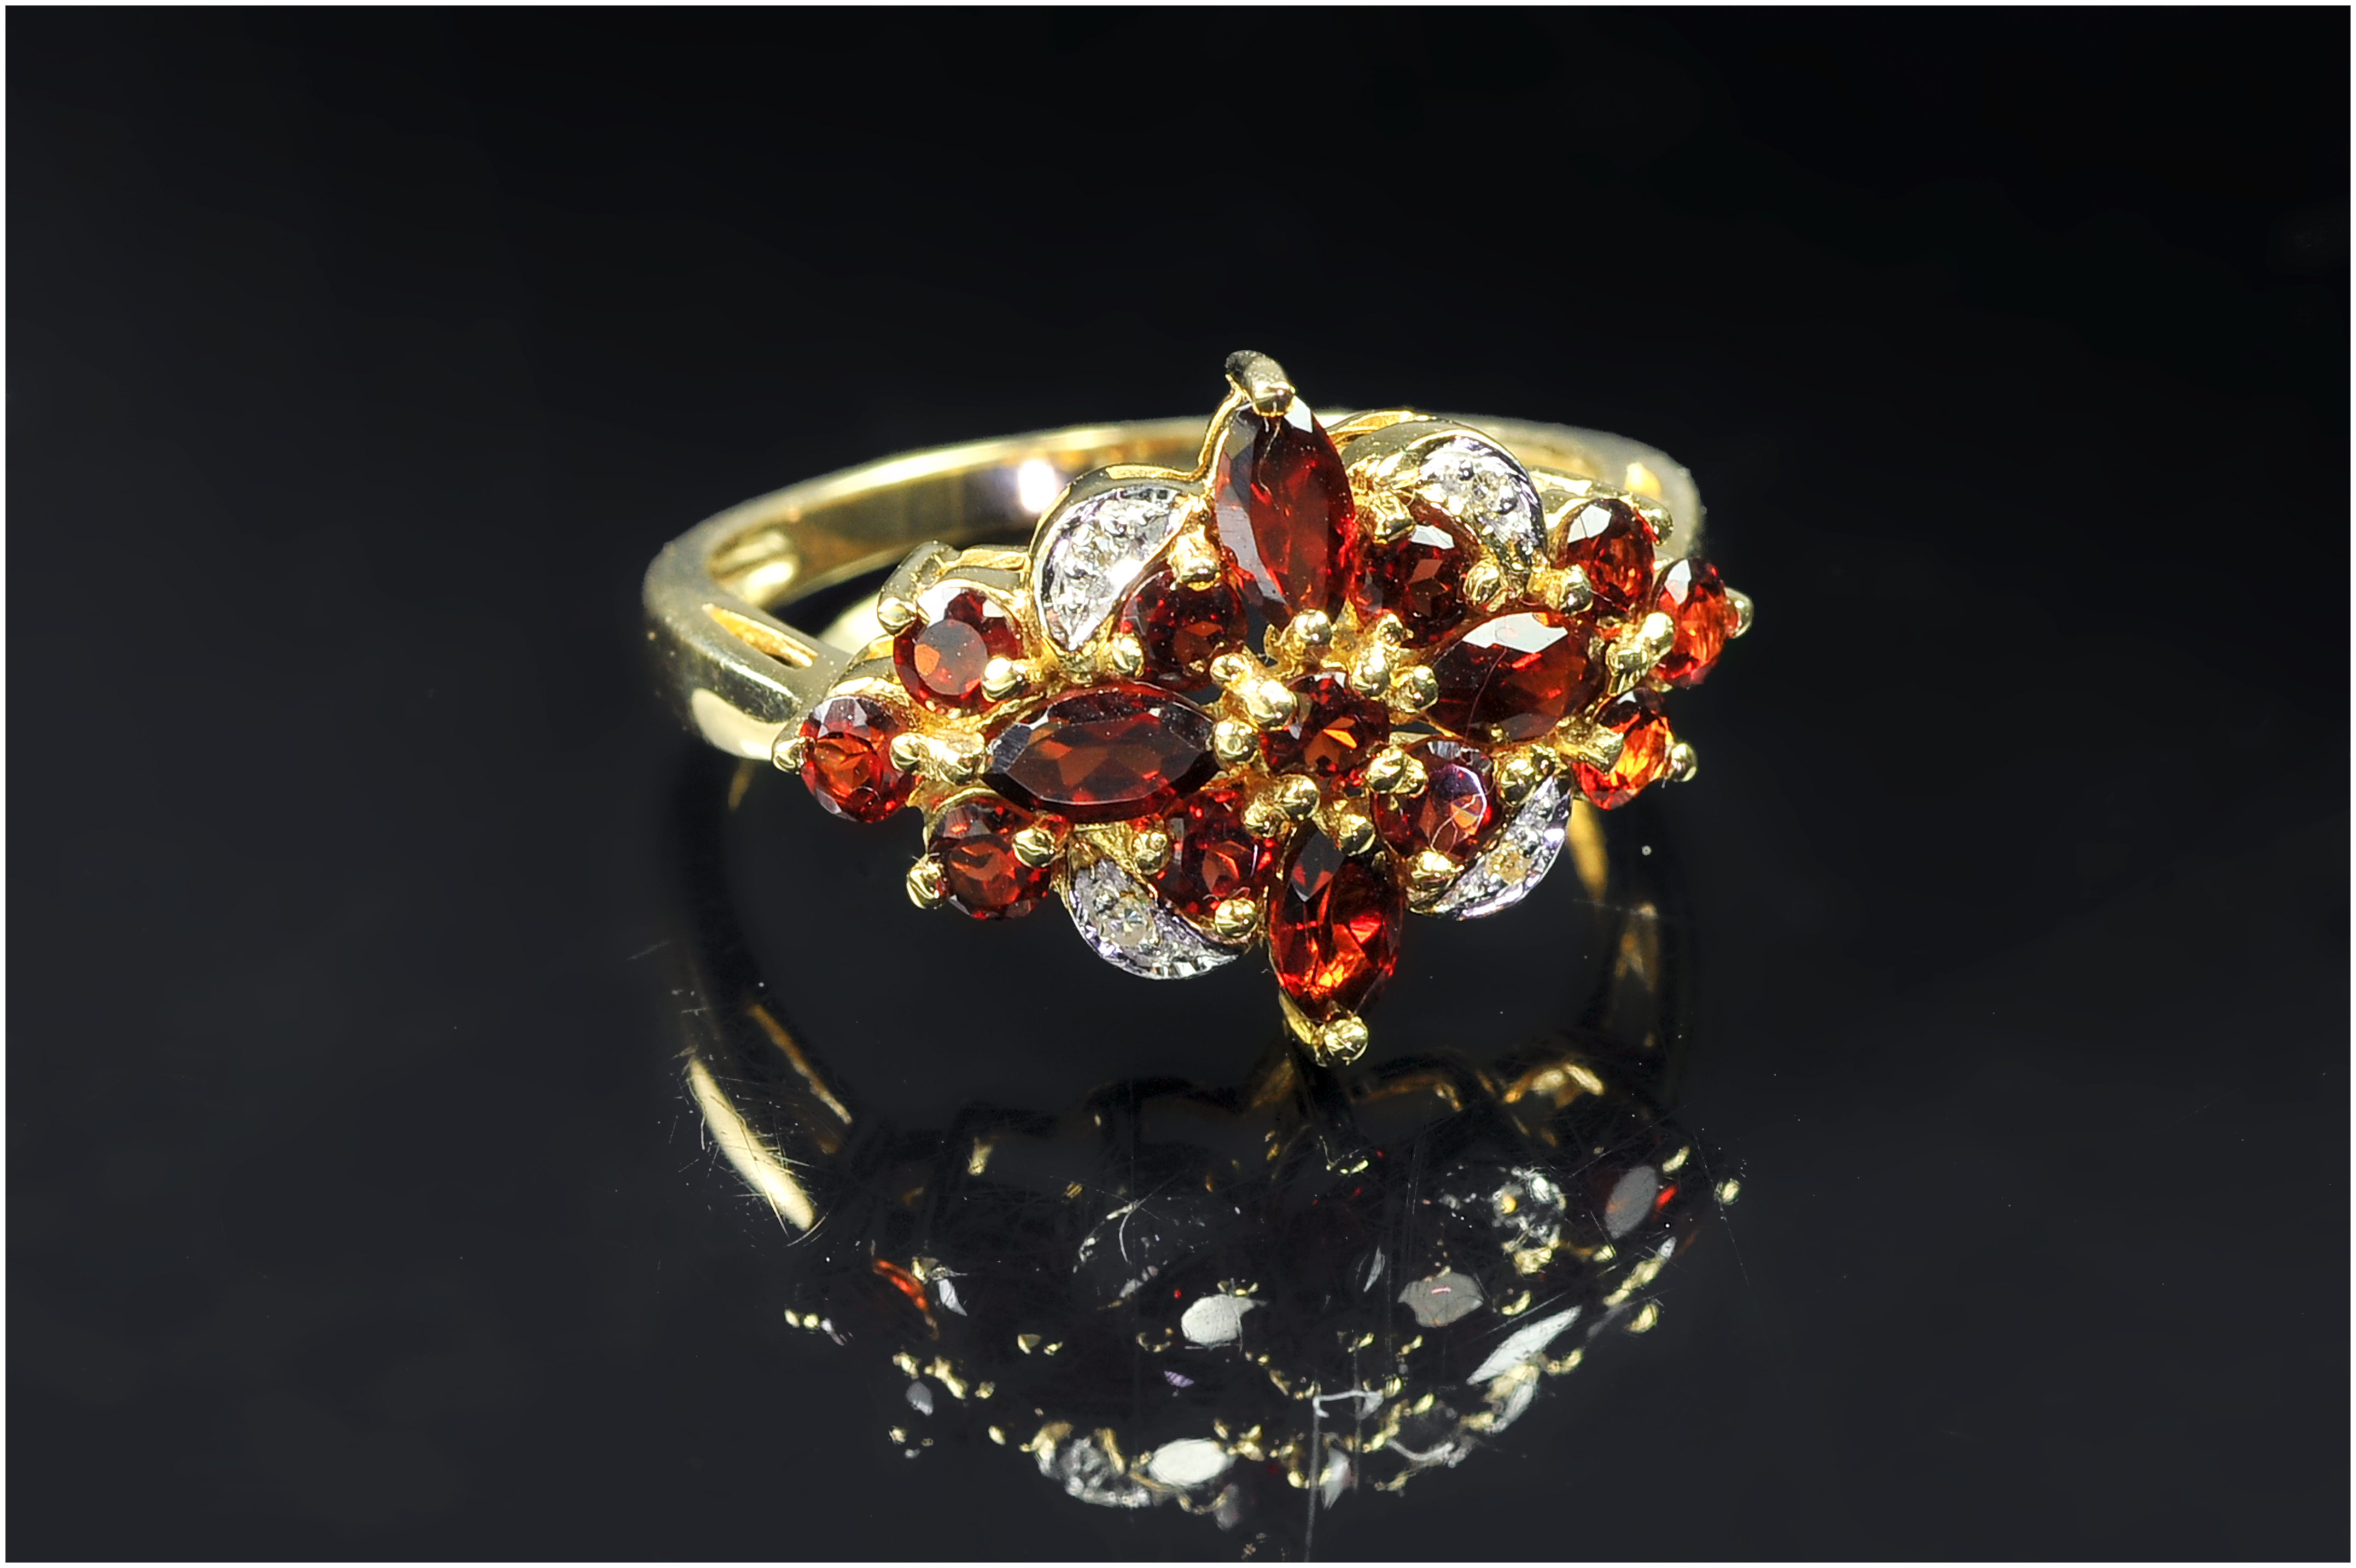 9ct Gold Diamond Dress Ring, Set With A Central Cluster Of Garnets Between Diamond Spacers, Fully - Image 4 of 5